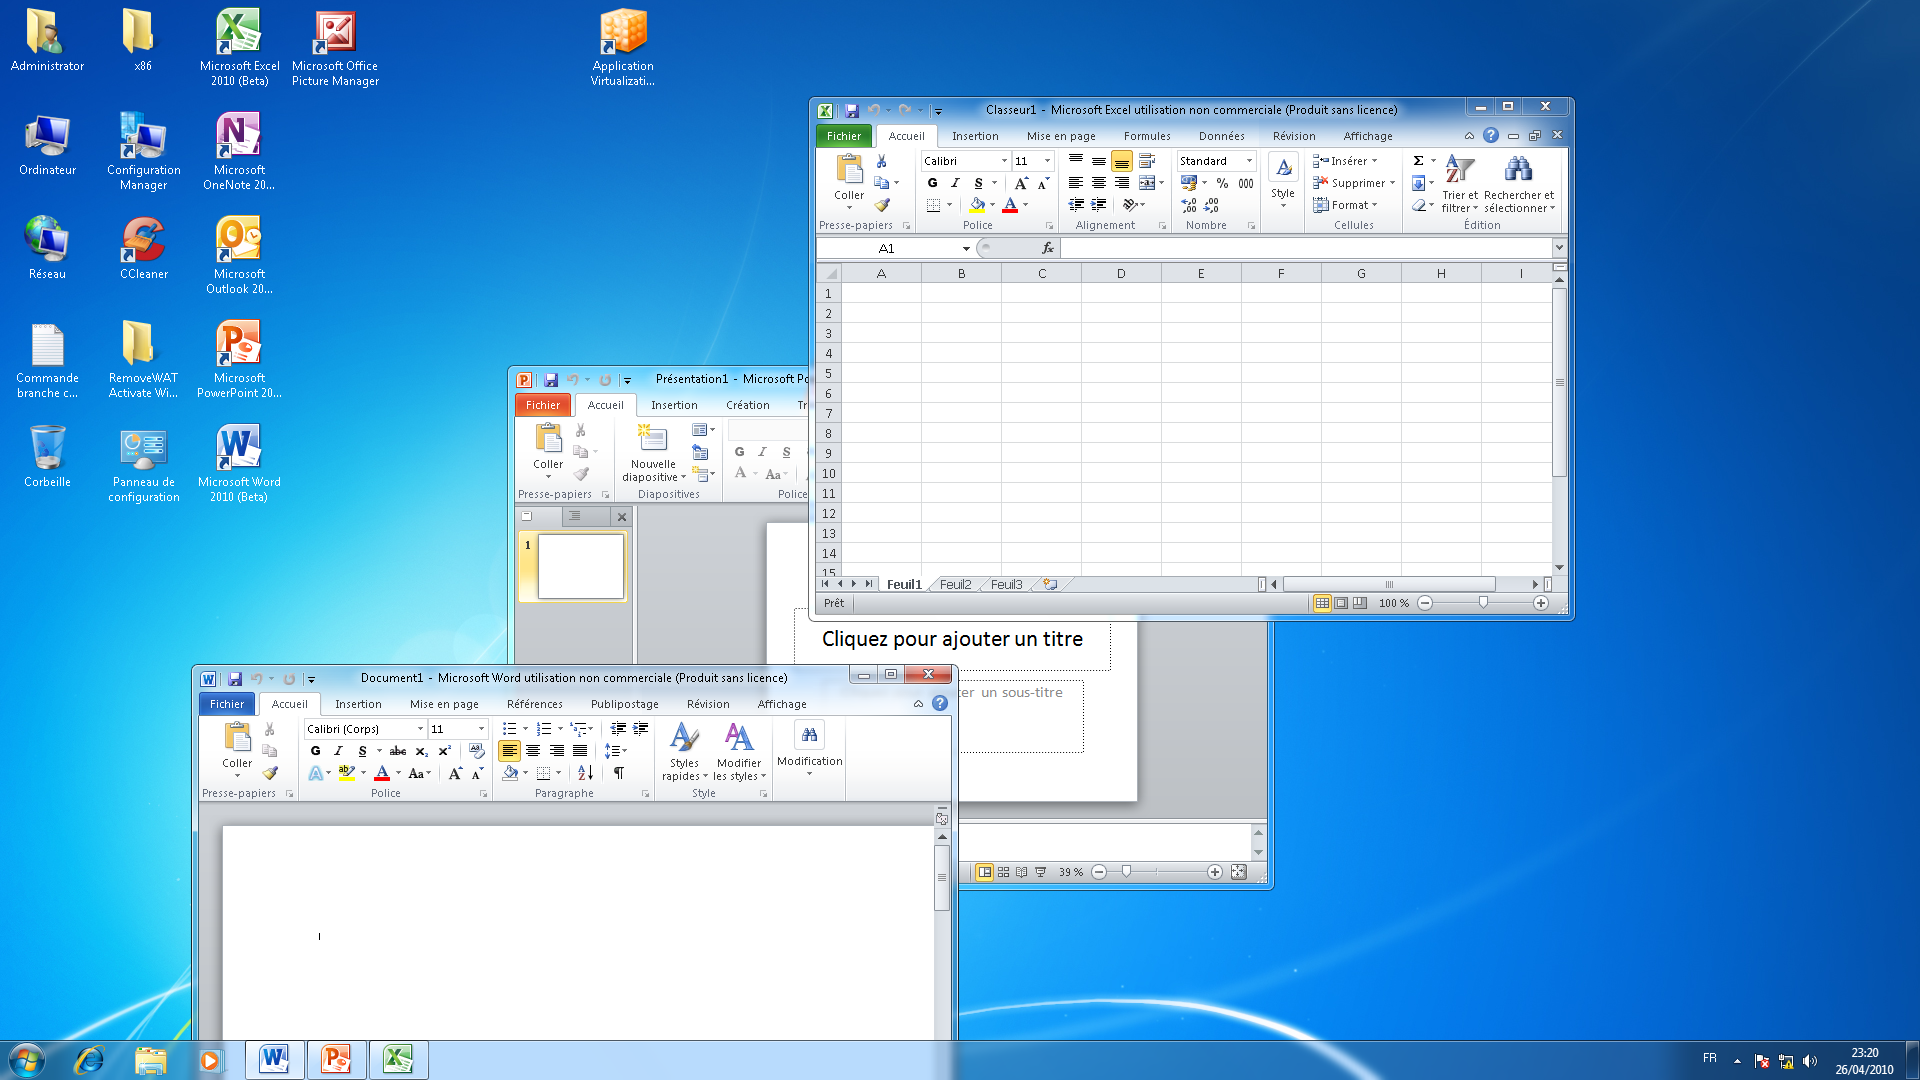 microsoft office download free 2010